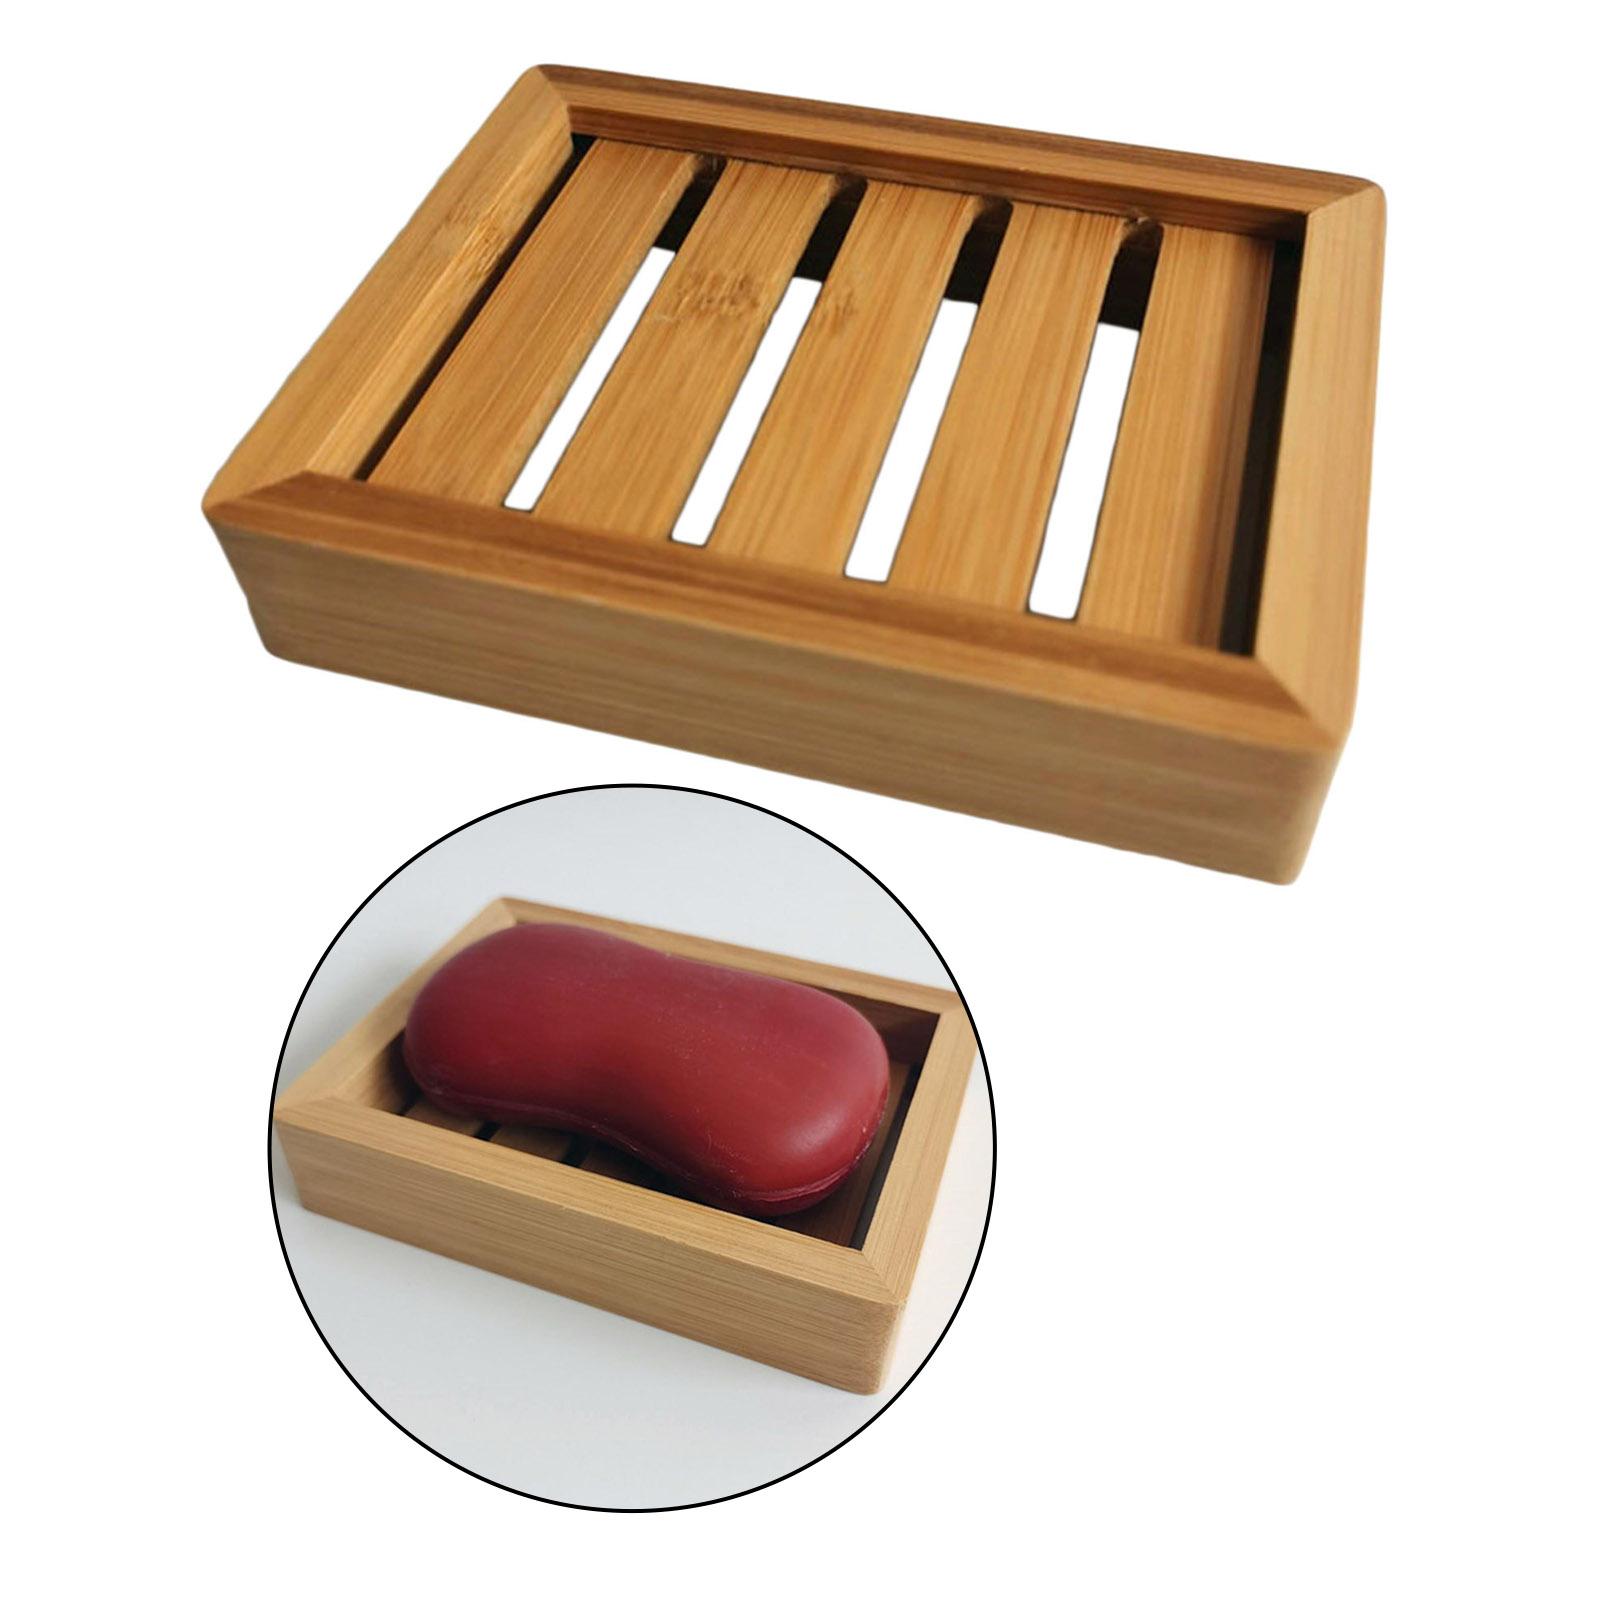 Bamboo Soap Dish Soap Tray Holder Storage Rack Plate Container Bathroom Sink